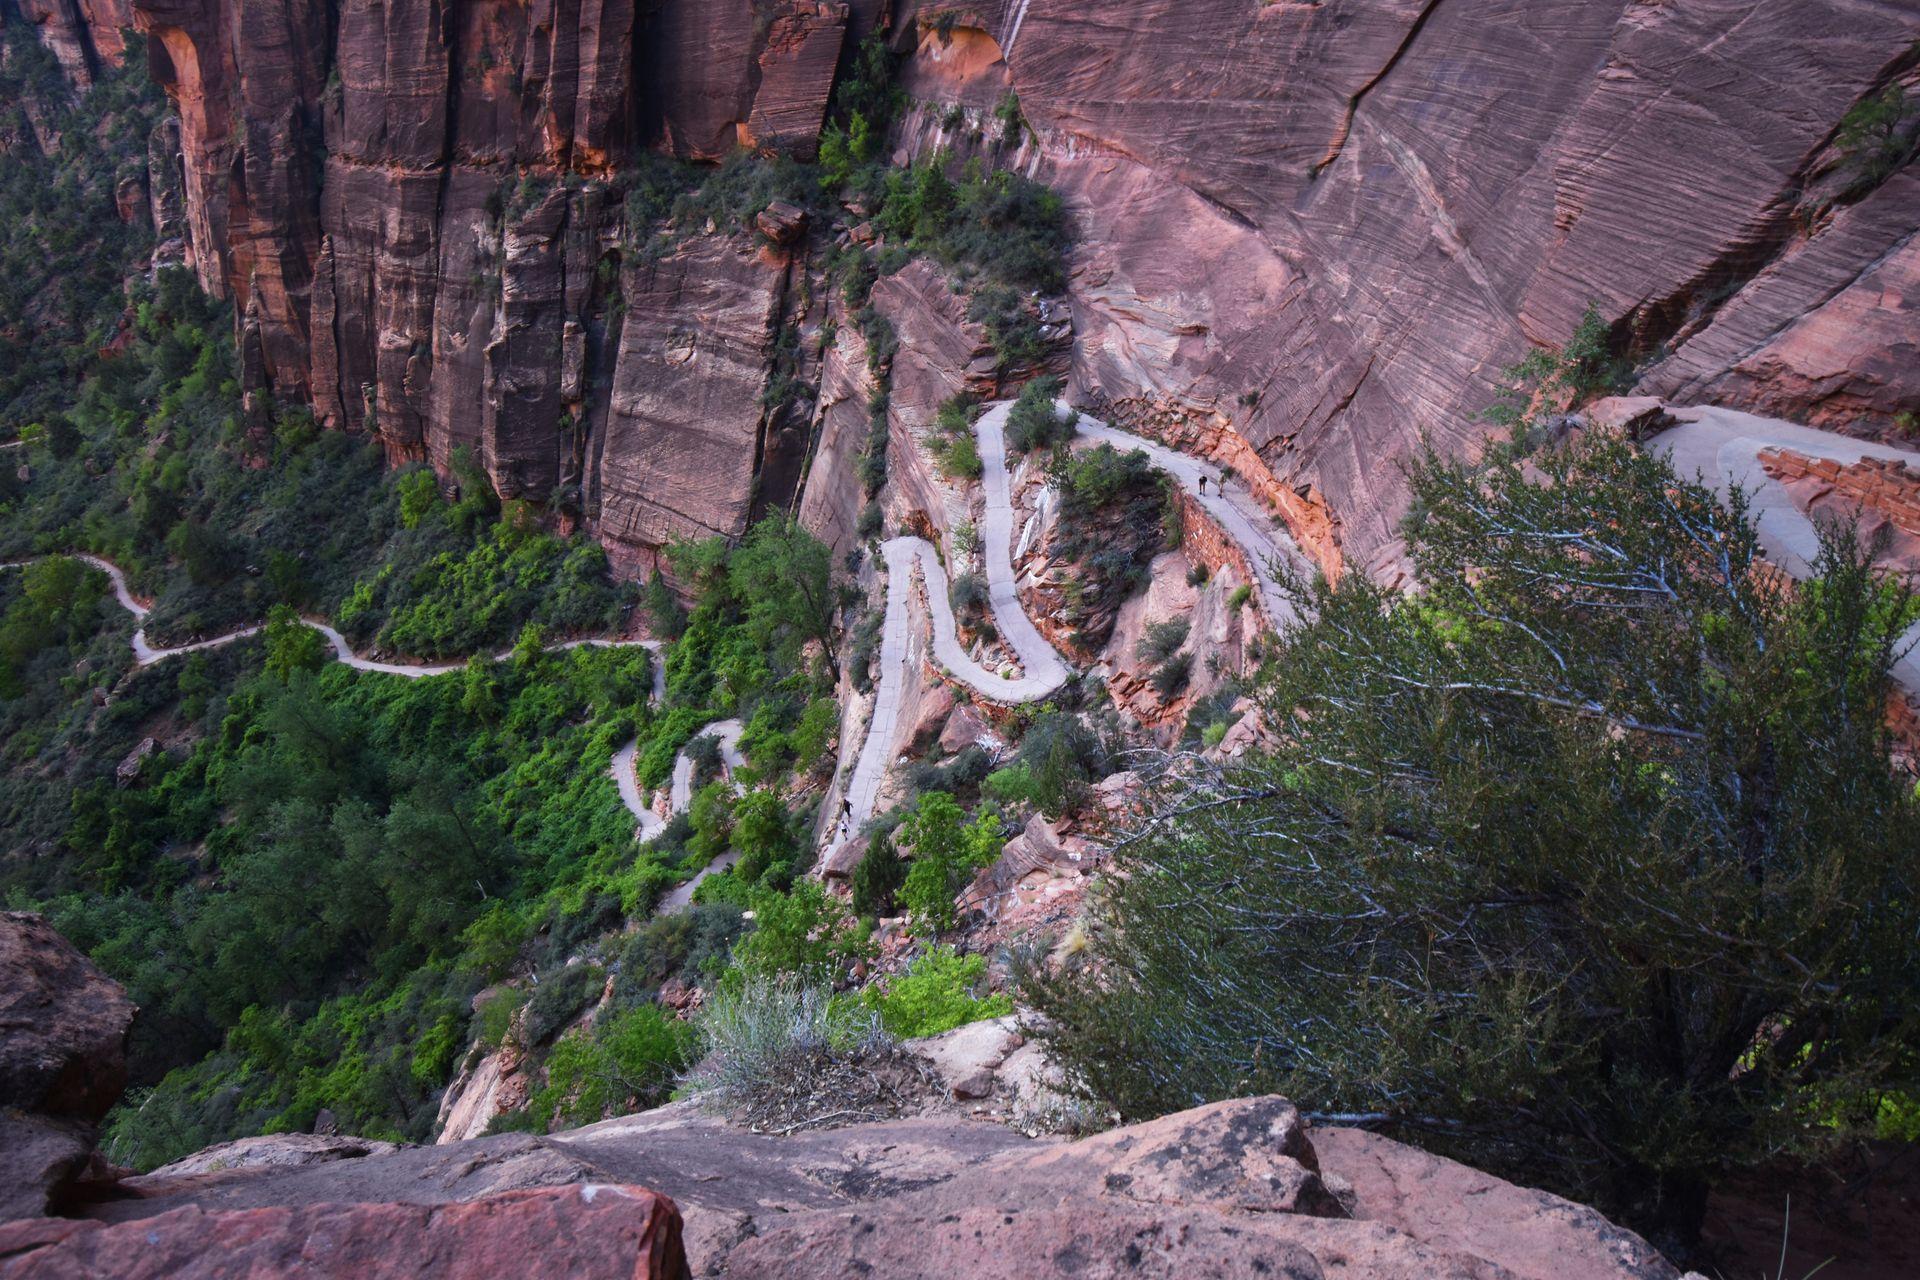 A view looking down at switchbacks that lead up to Angel's Landing.